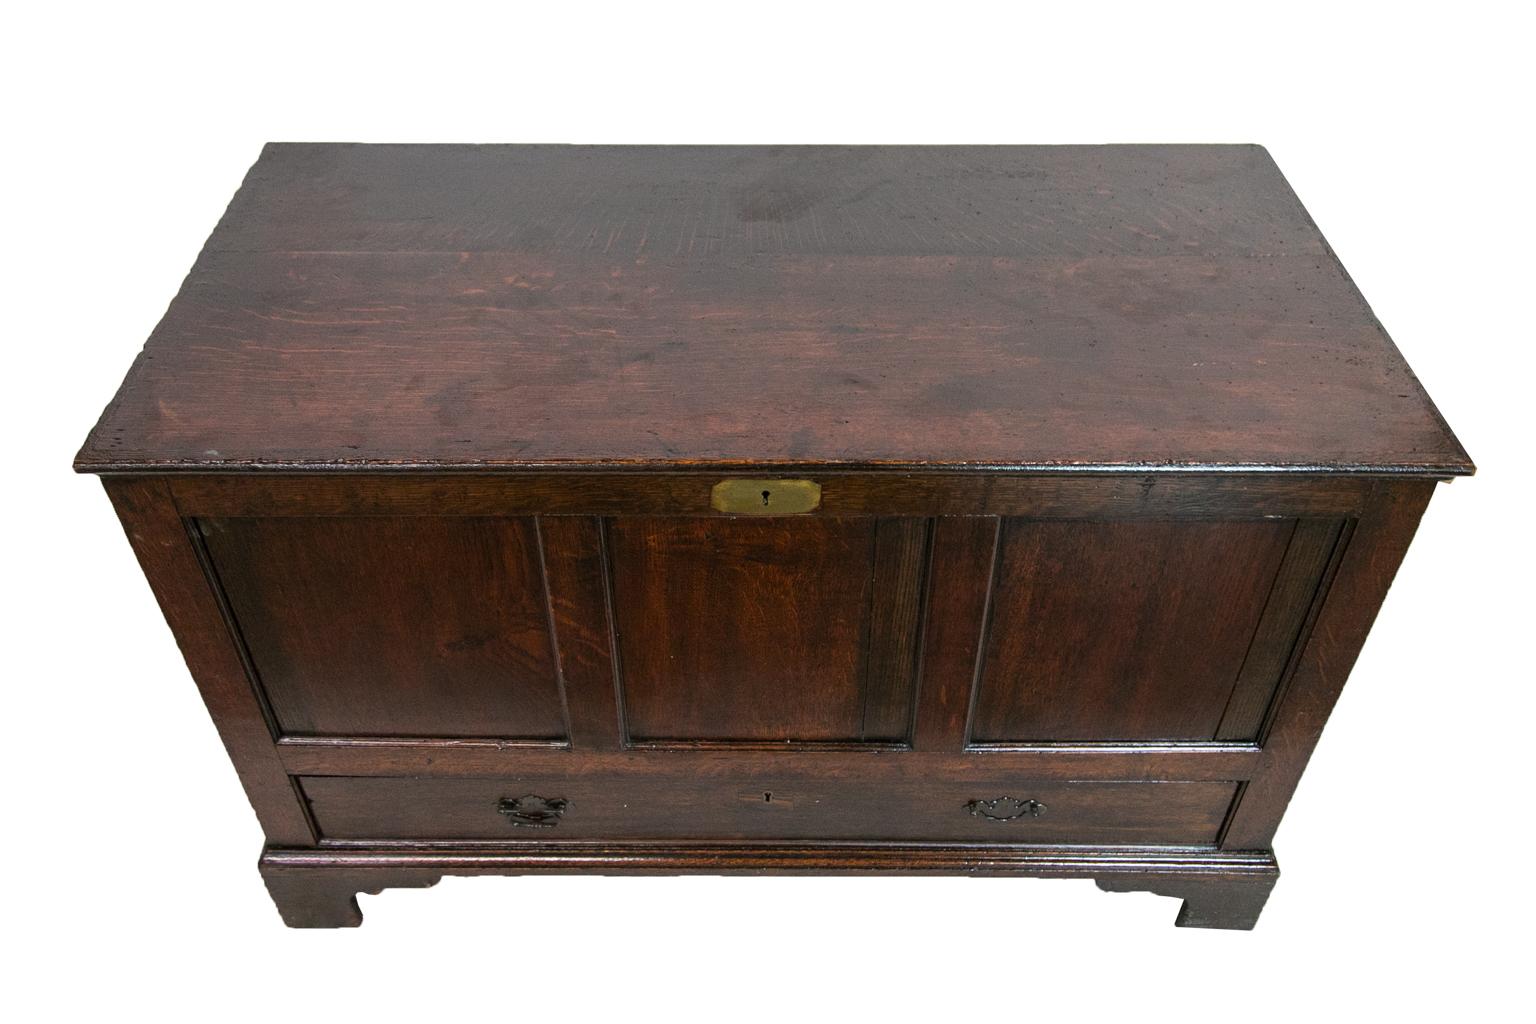 The front of this English oak blanket chest has three recessed panels framed with molded edges and one long drawer with the original open panels. The key hole has a flush brass escutcheon. The sides have recessed panels with molded framing. The base